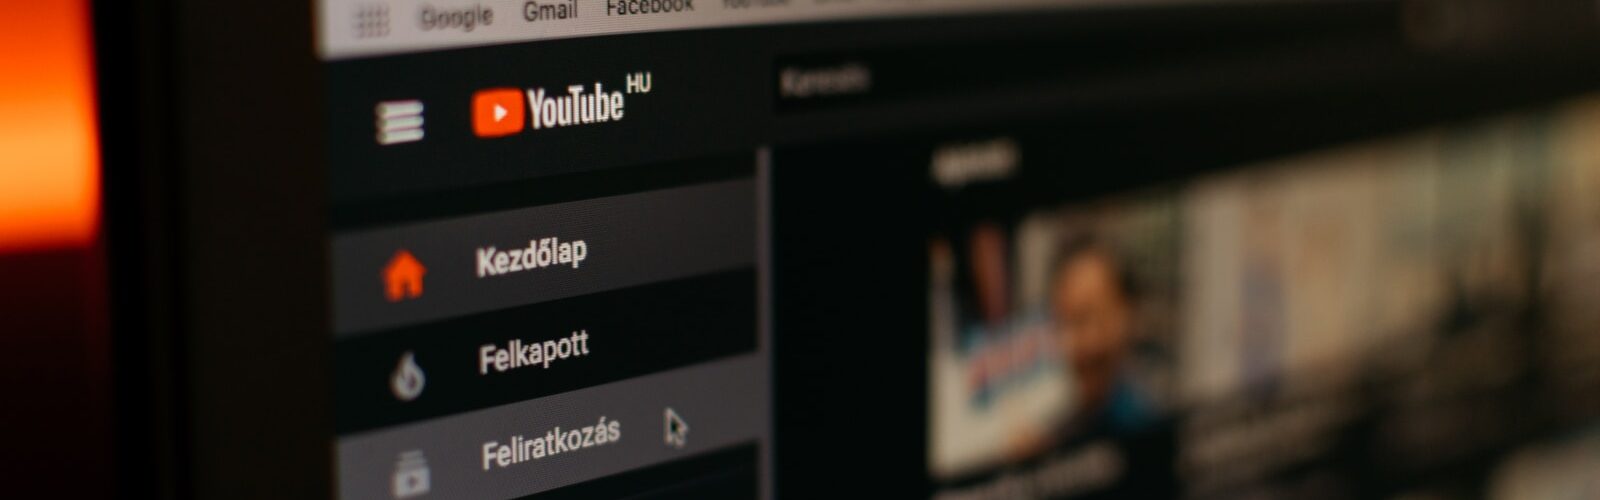 How to Make Your Videos More Visible to Search Engines